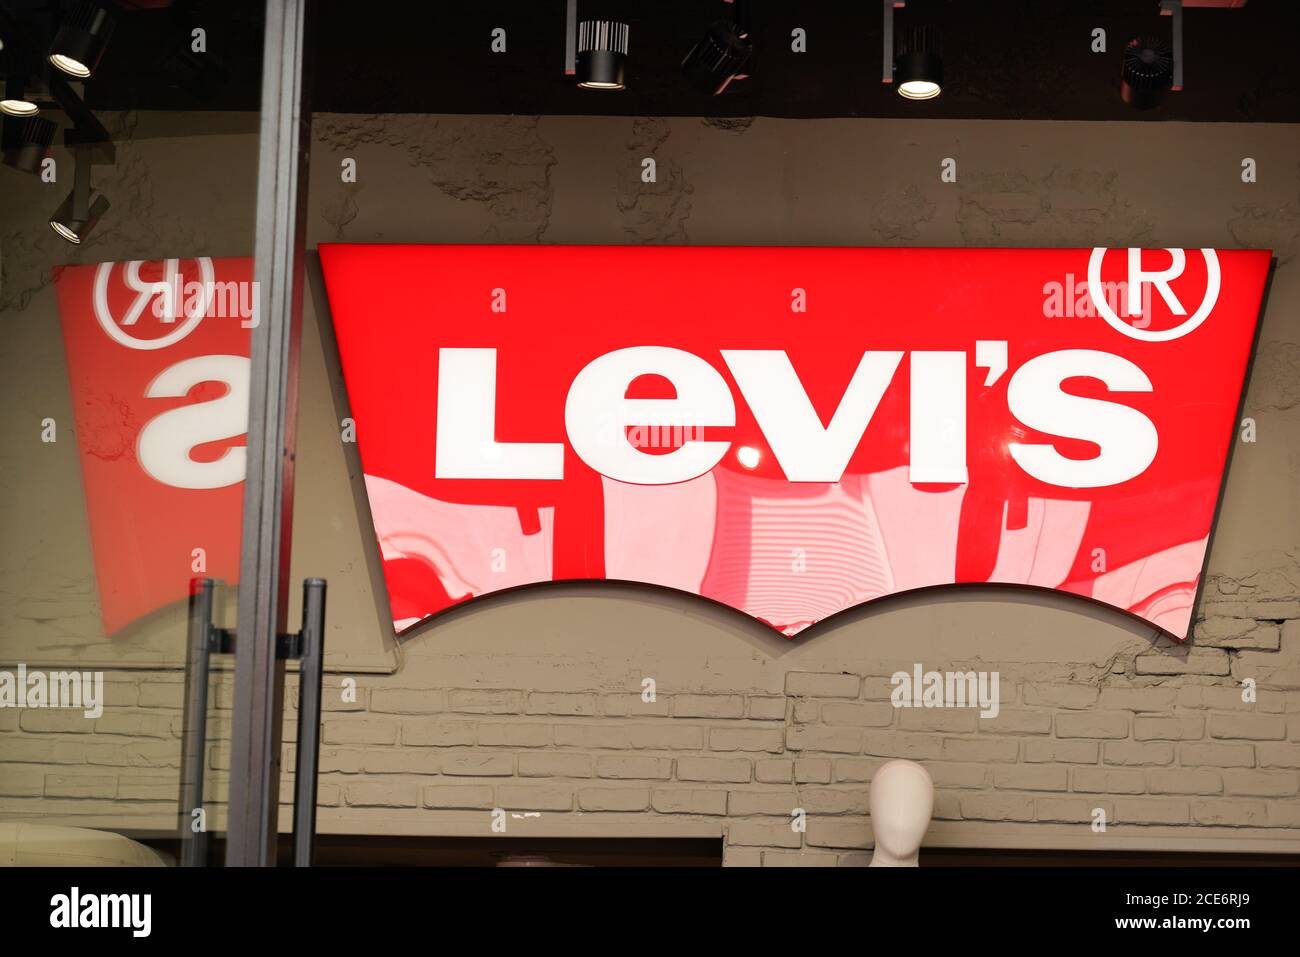 Bordeaux , Aquitaine / France - 08 25 2020 : Levi's logo red and text sign  of Jeans levis store of clothing fashion levi strauss retail shop Stock  Photo - Alamy